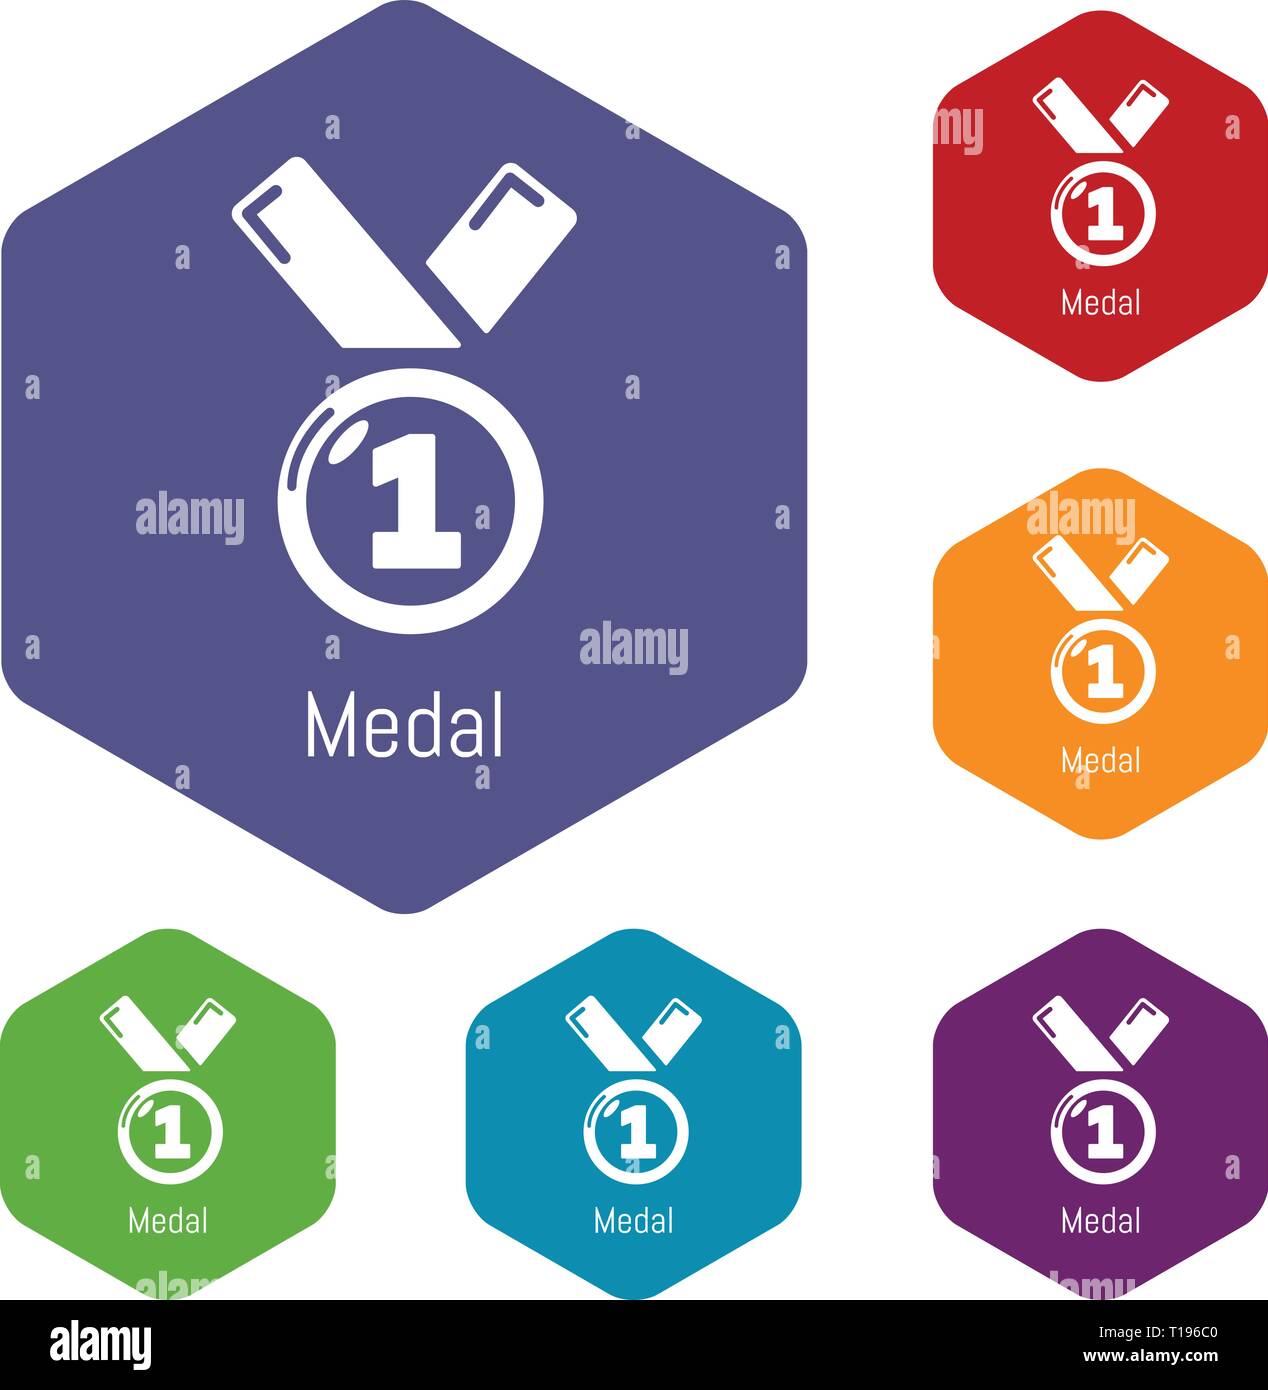 Medal icons vector hexahedron Stock Vector